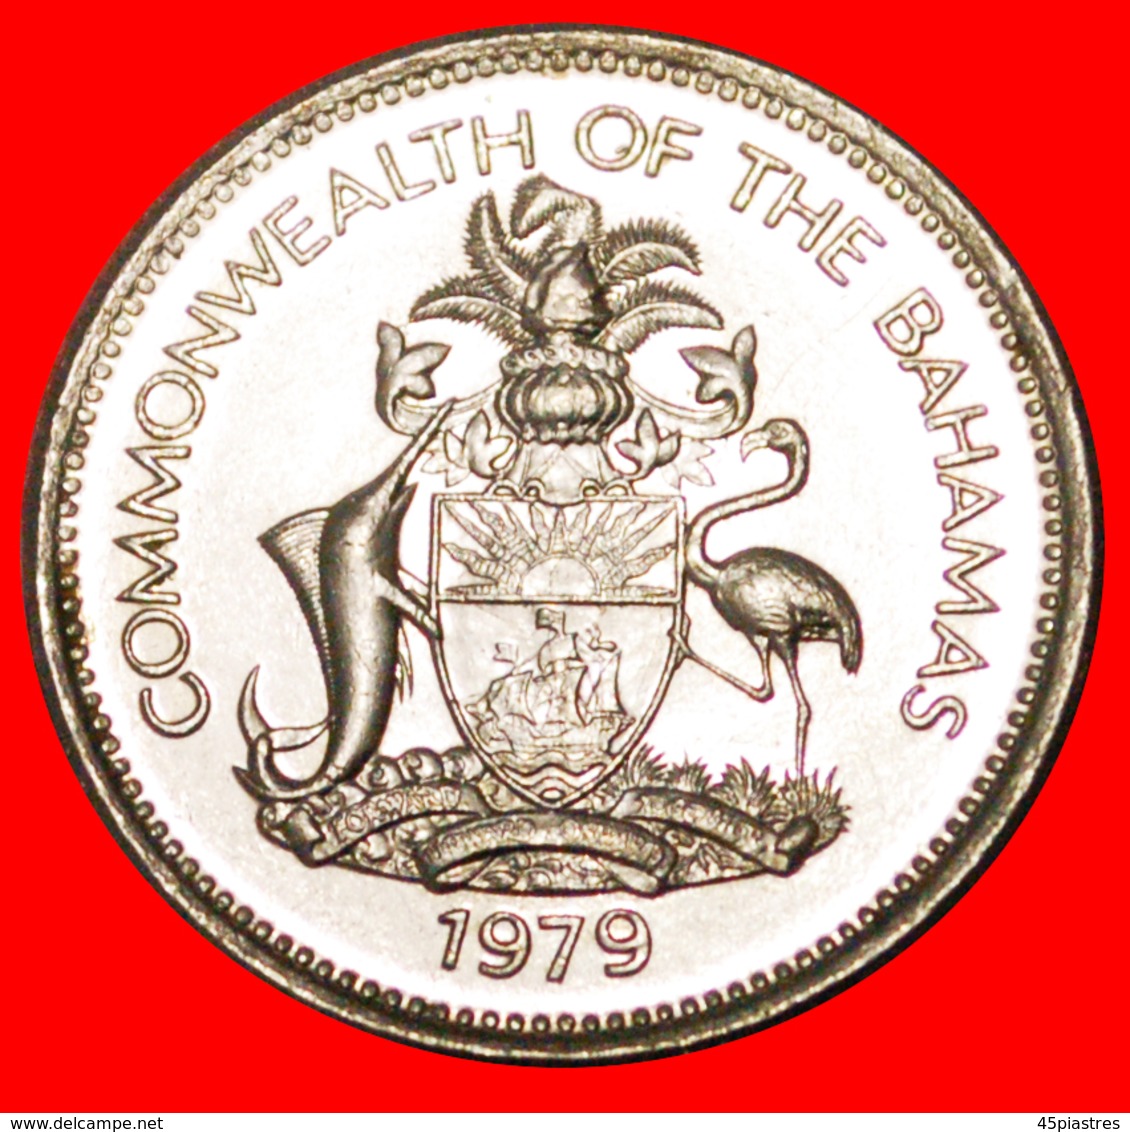 # GREAT BRITAIN: THE BAHAMAS ★ 25 CENTS 1979 SHIP MINT LUSTER! LOW START ★ NO RESERVE! - Bahamas